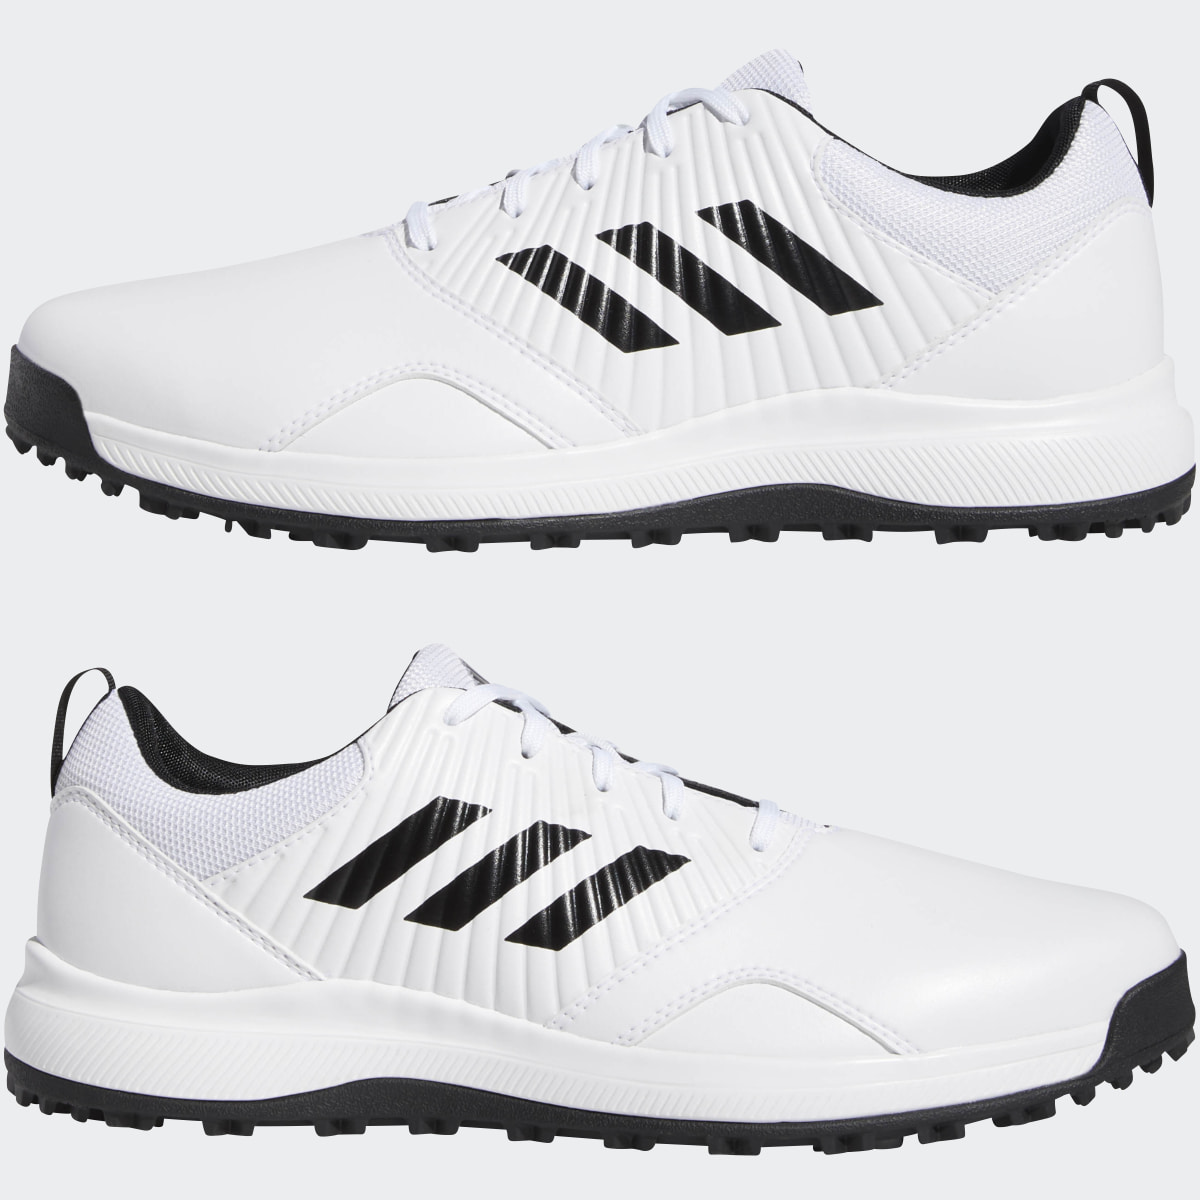 Adidas CP Traxion Spikeless Golf Shoes. 9